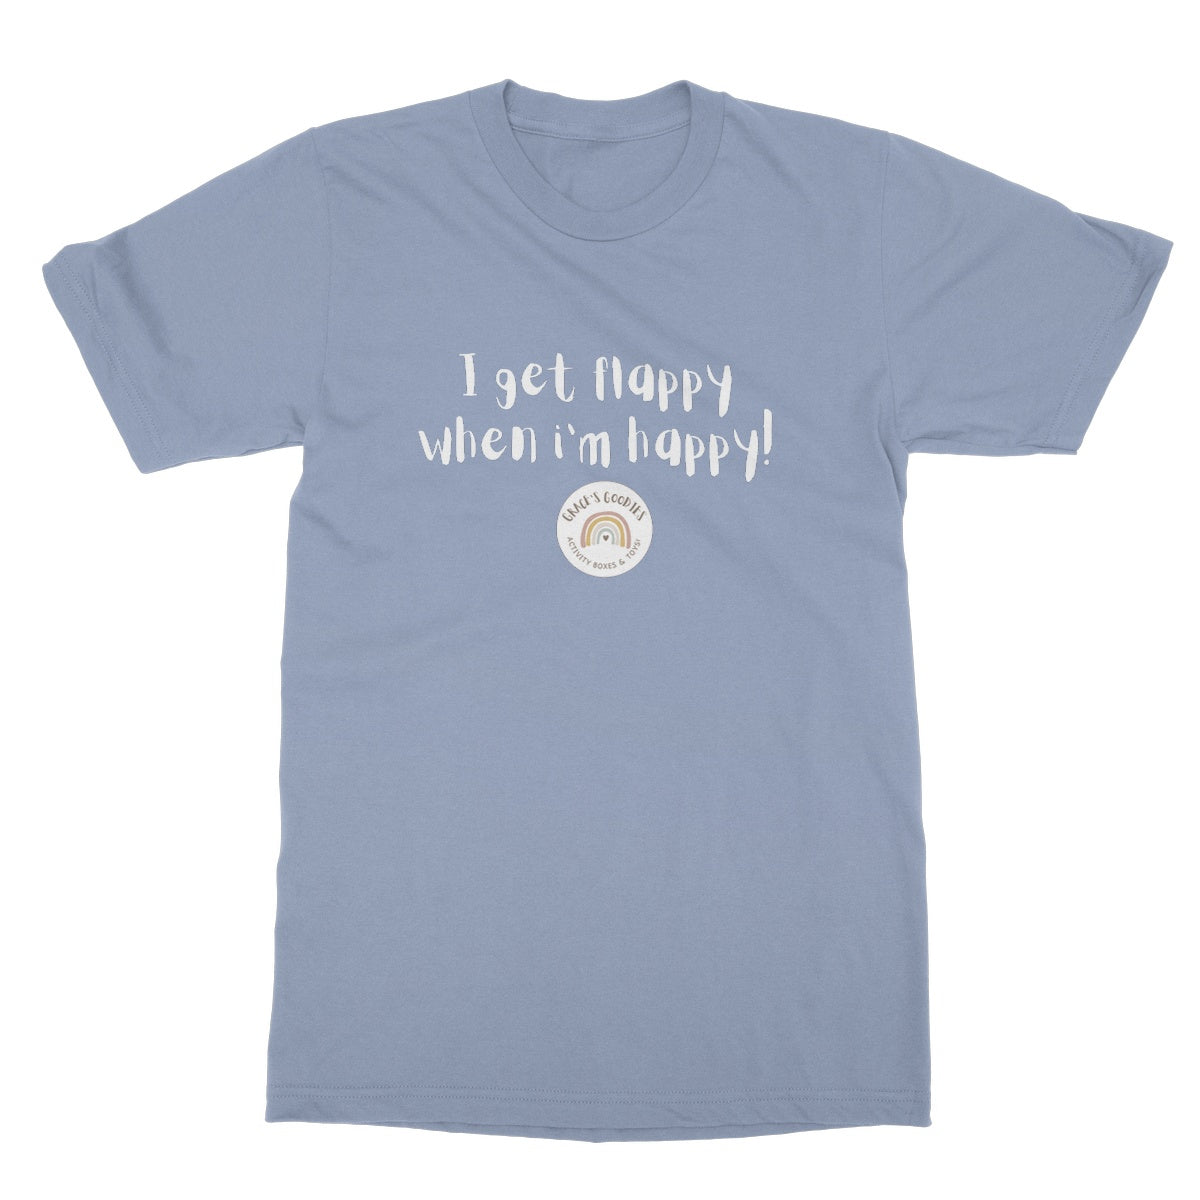 I get flappy when i'm happy Softstyle T-Shirt - Adult